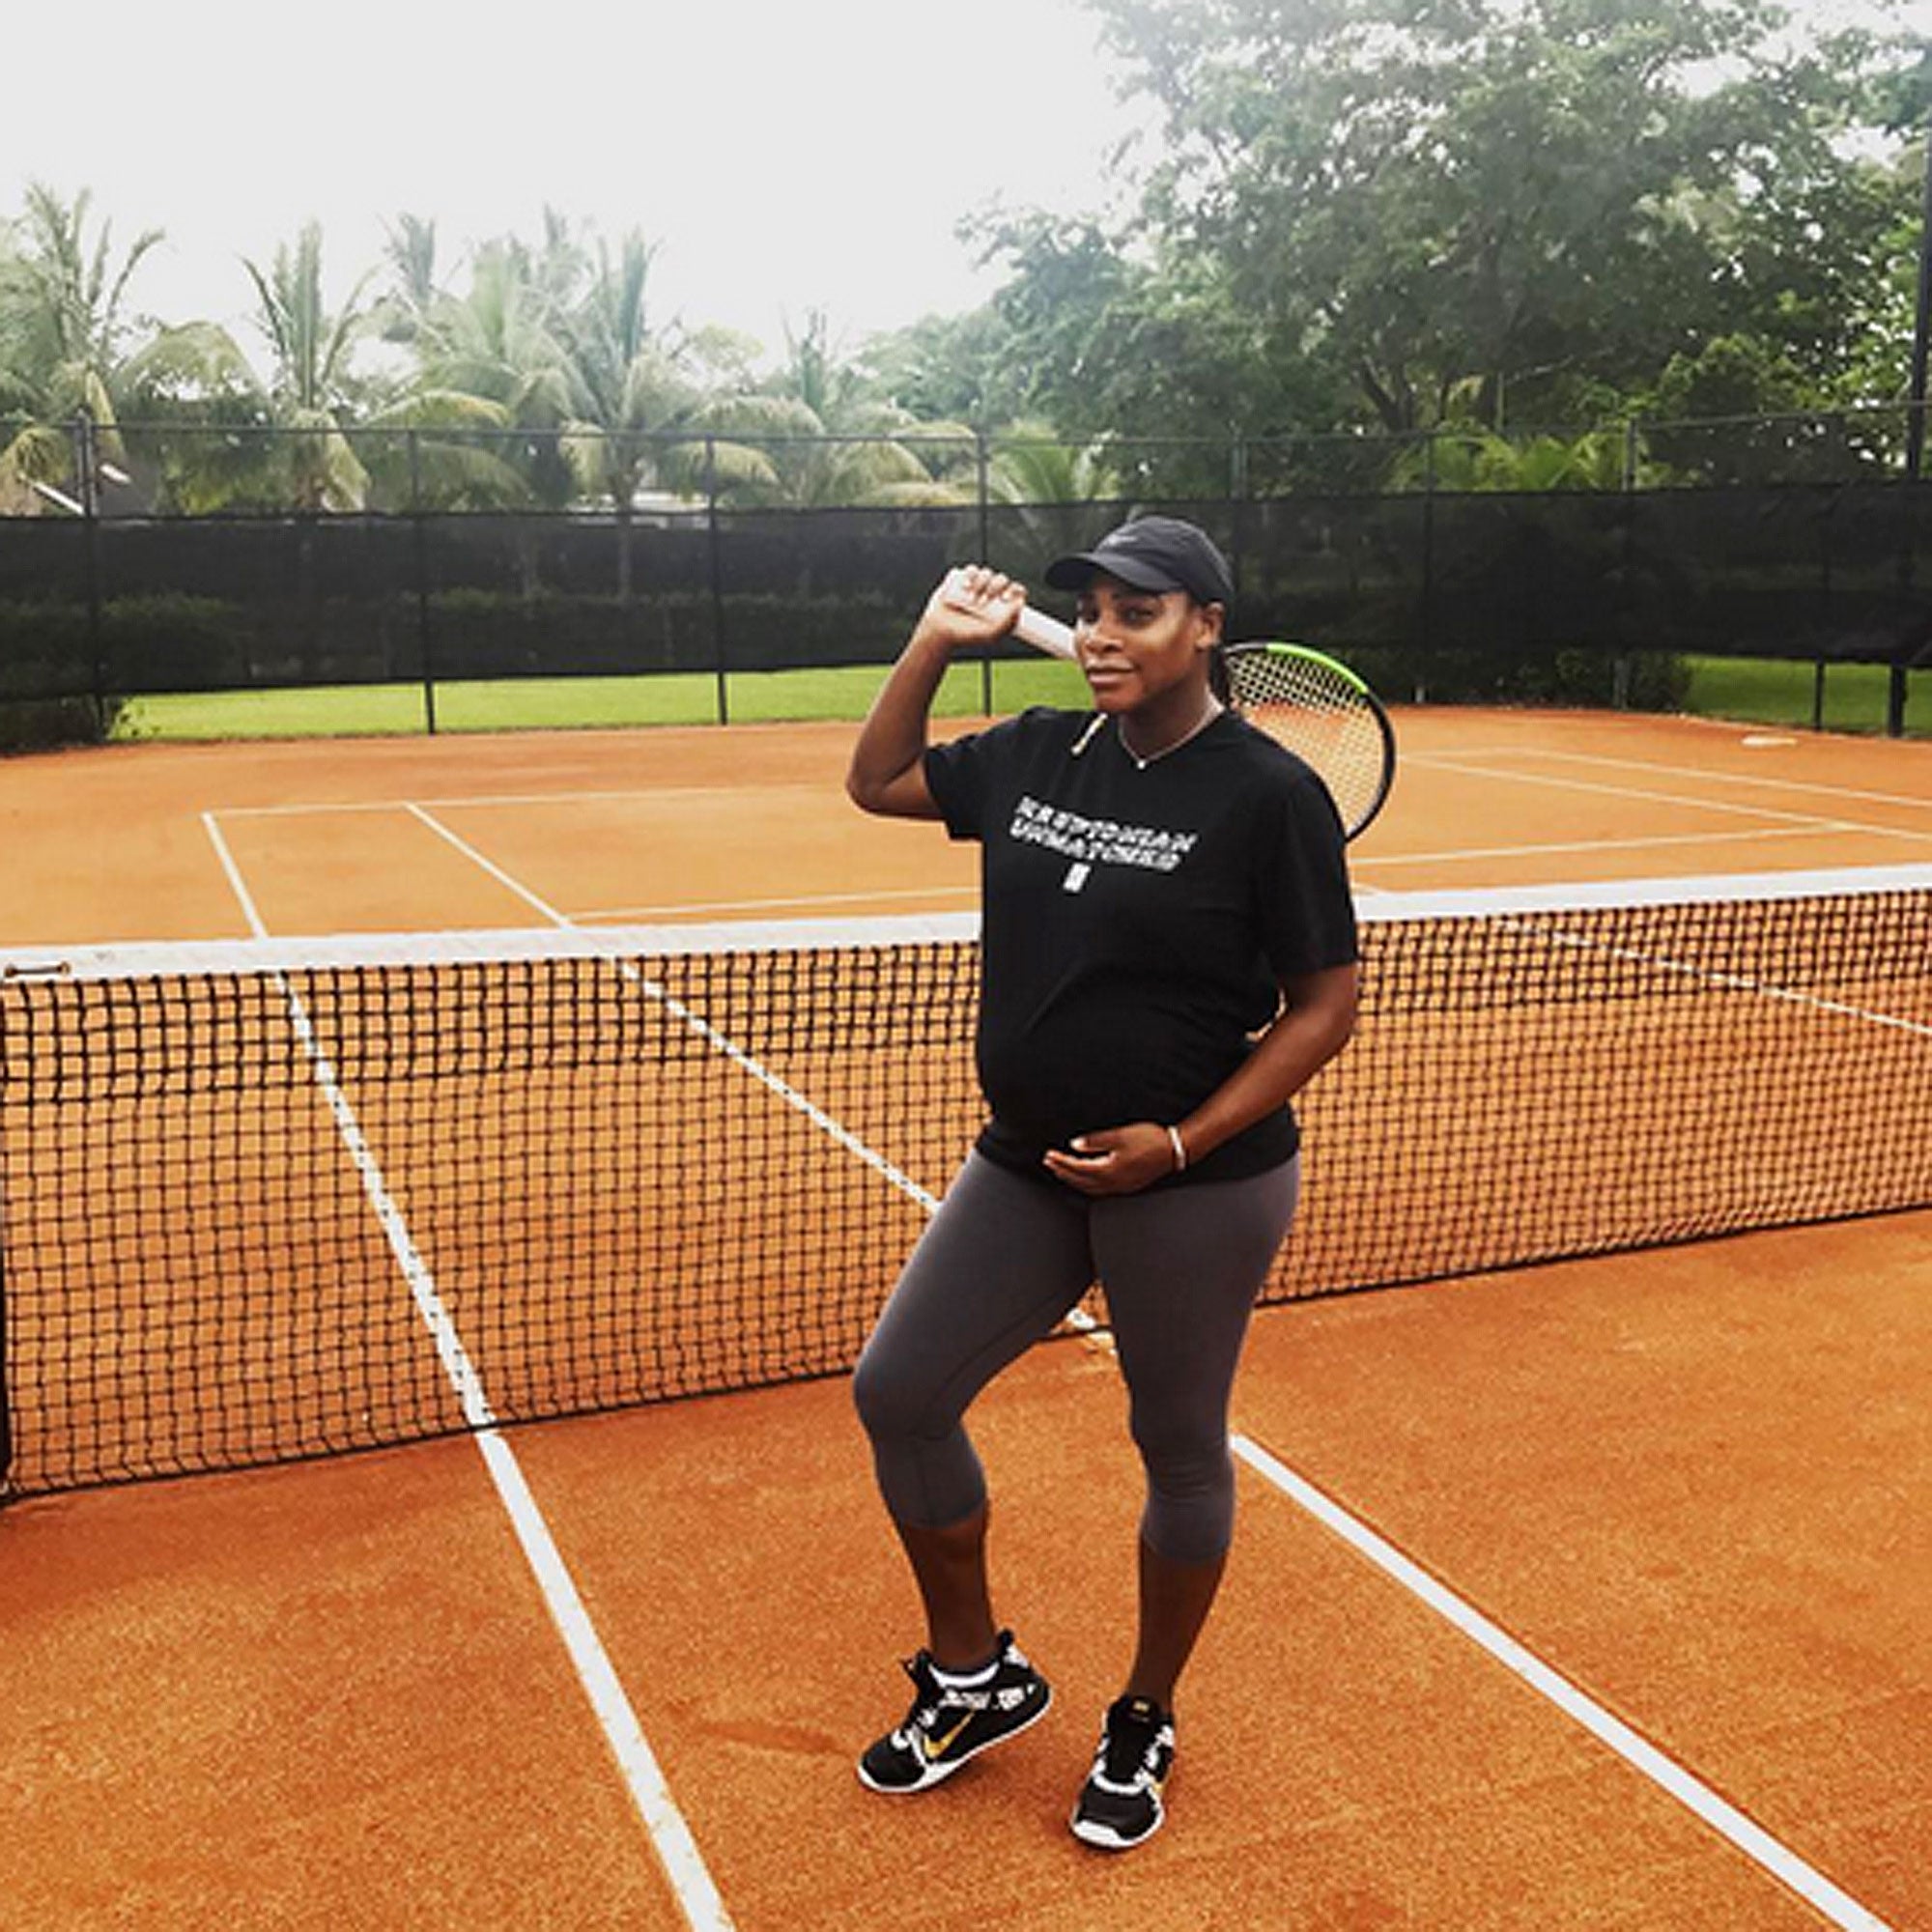 Serena Williams Is 'Exercising For As Long As Possible' During Pregnancy: 'I Want the Baby To Be Healthy'
